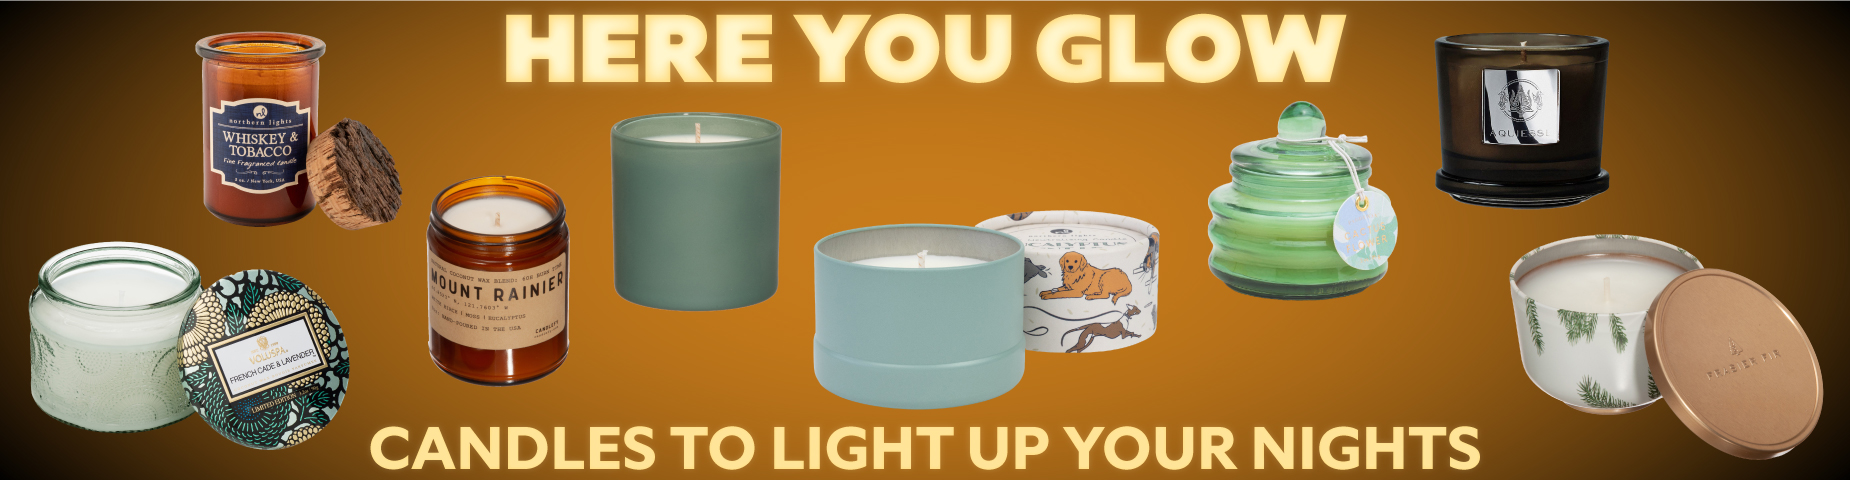 HERE YOU GLOW: Candles to light up your nights